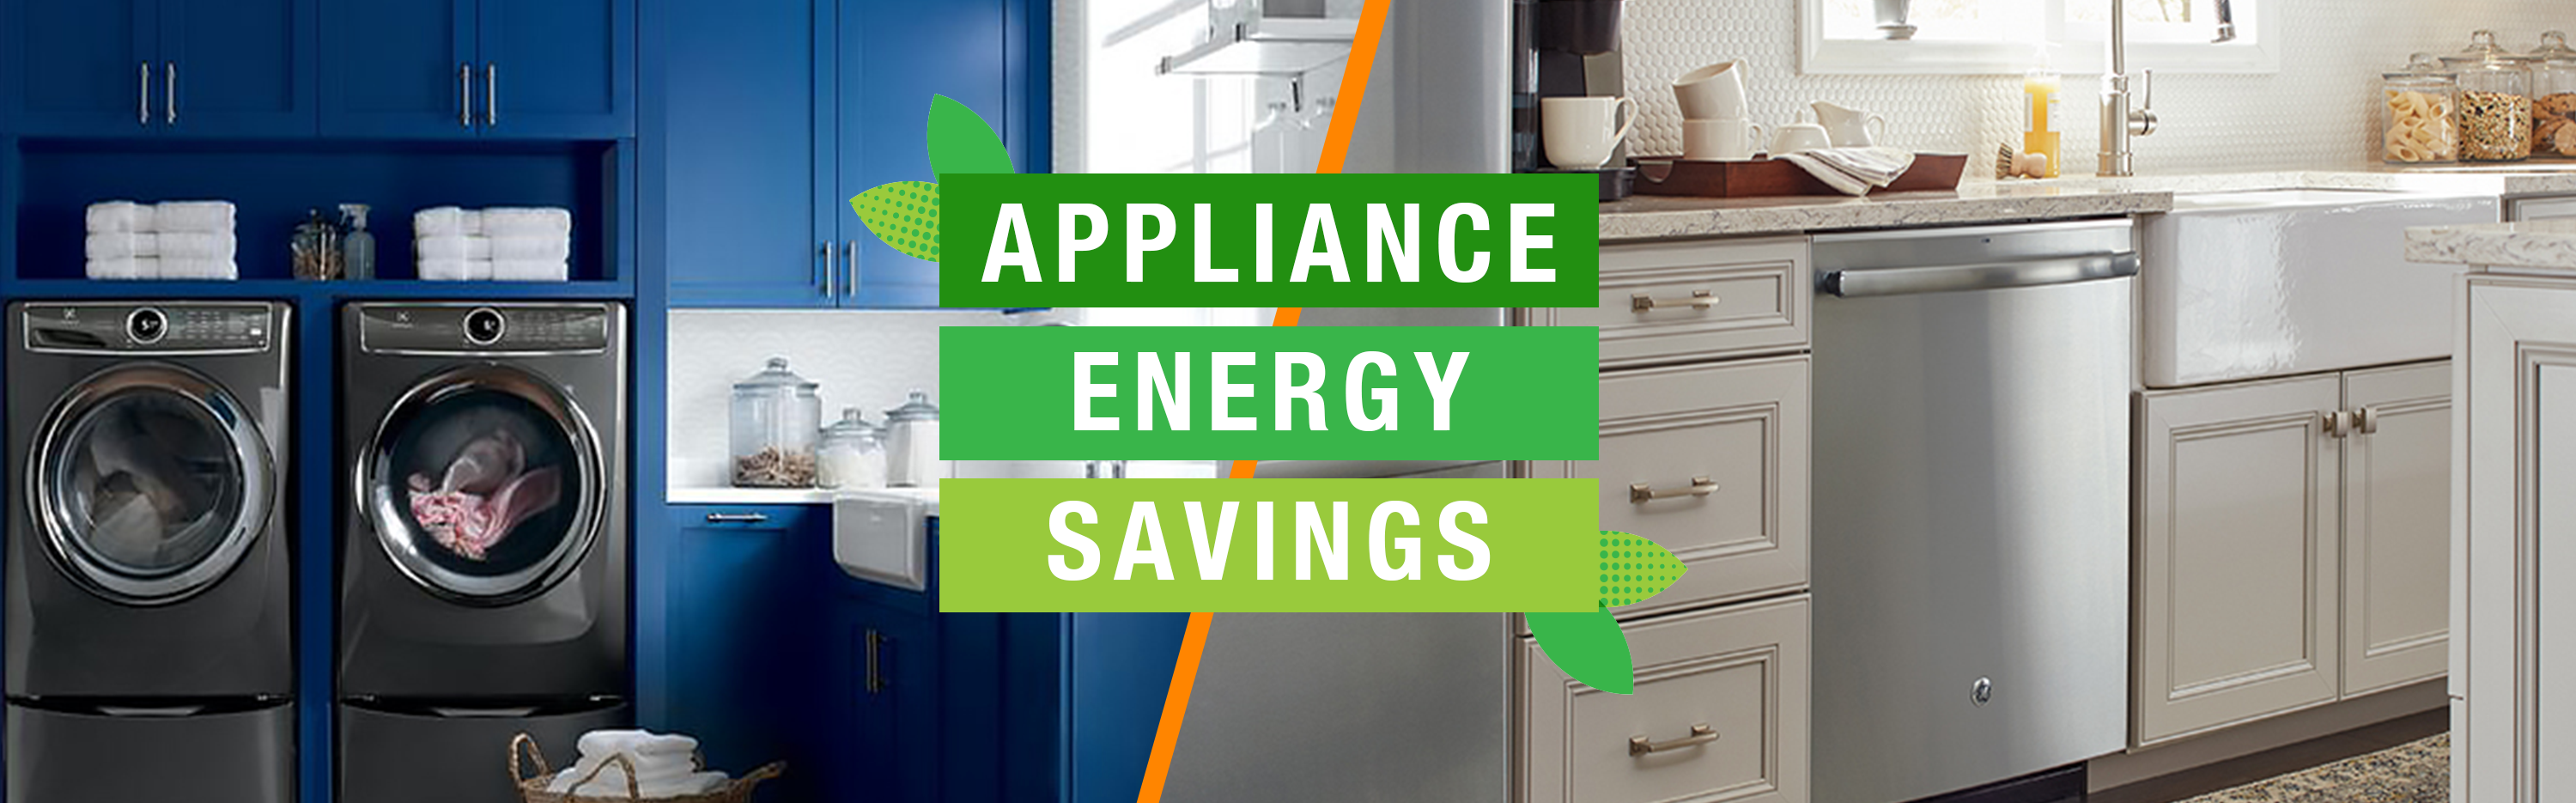 Appliances to help save energy. 